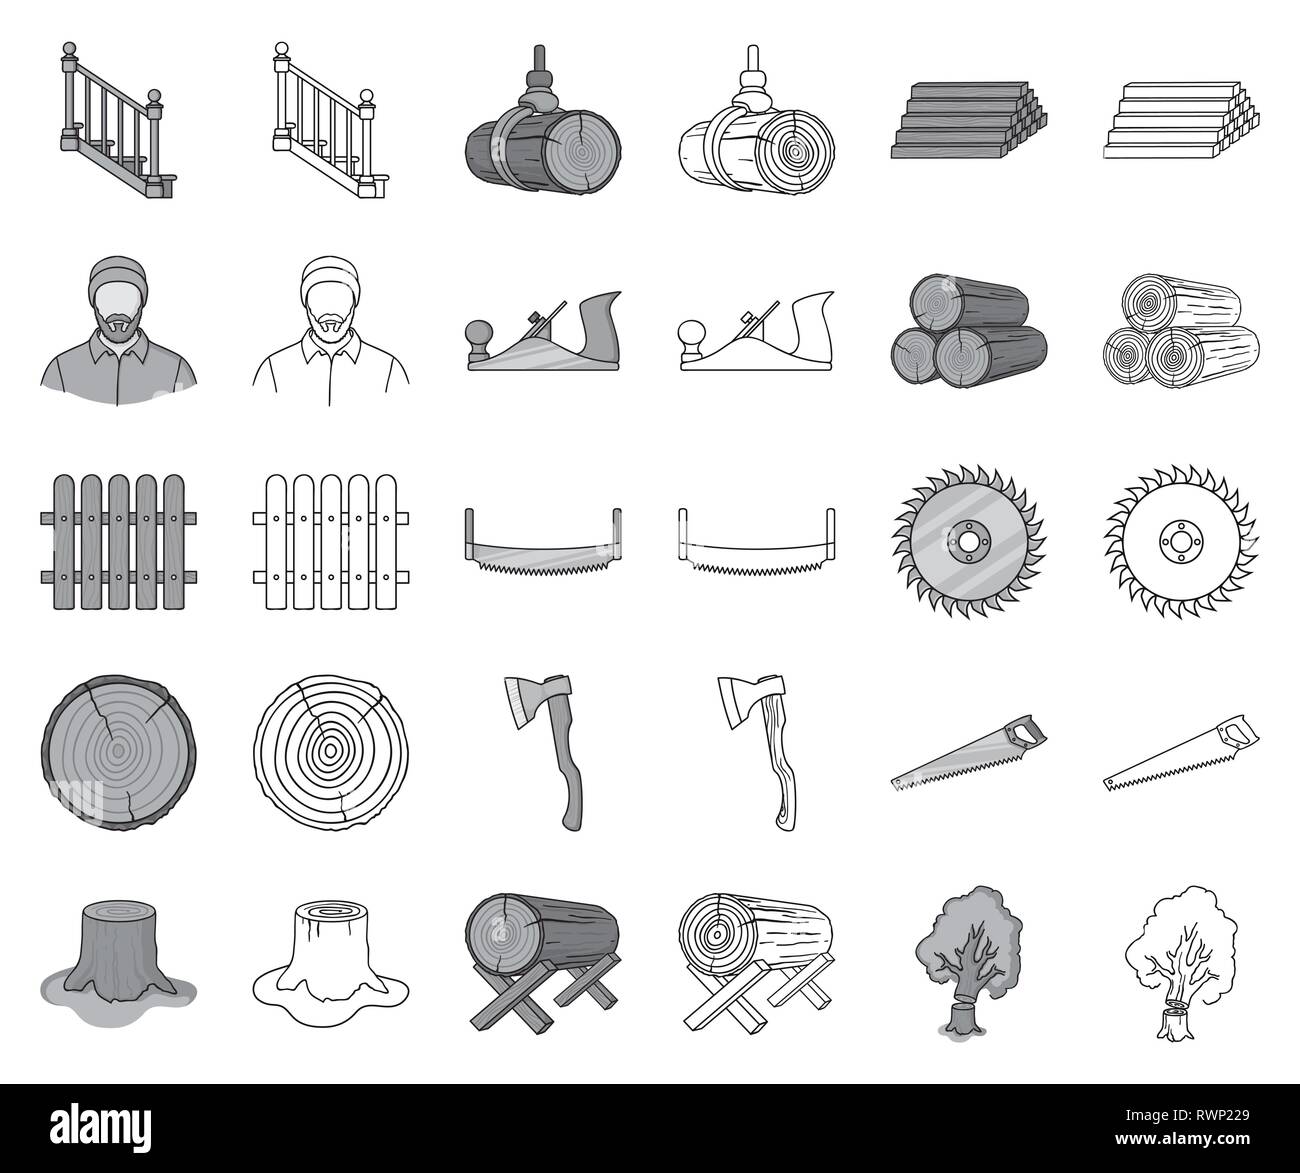 art,axe,chisel,collection,crane,cross,design,disc,equipment,falling,fence,goats,hand,hydraulic,icon,illustration,isolated,jack,logo,logs,lumber,lumbers,lumbrejack,monochrome,outline,plane,processing,product,production,saw,sawing,sawmill,section,set,sign,stack,stairs,stump,symbol,timber,tools,tree,two-man,vector,web Vector Vectors , Stock Vector